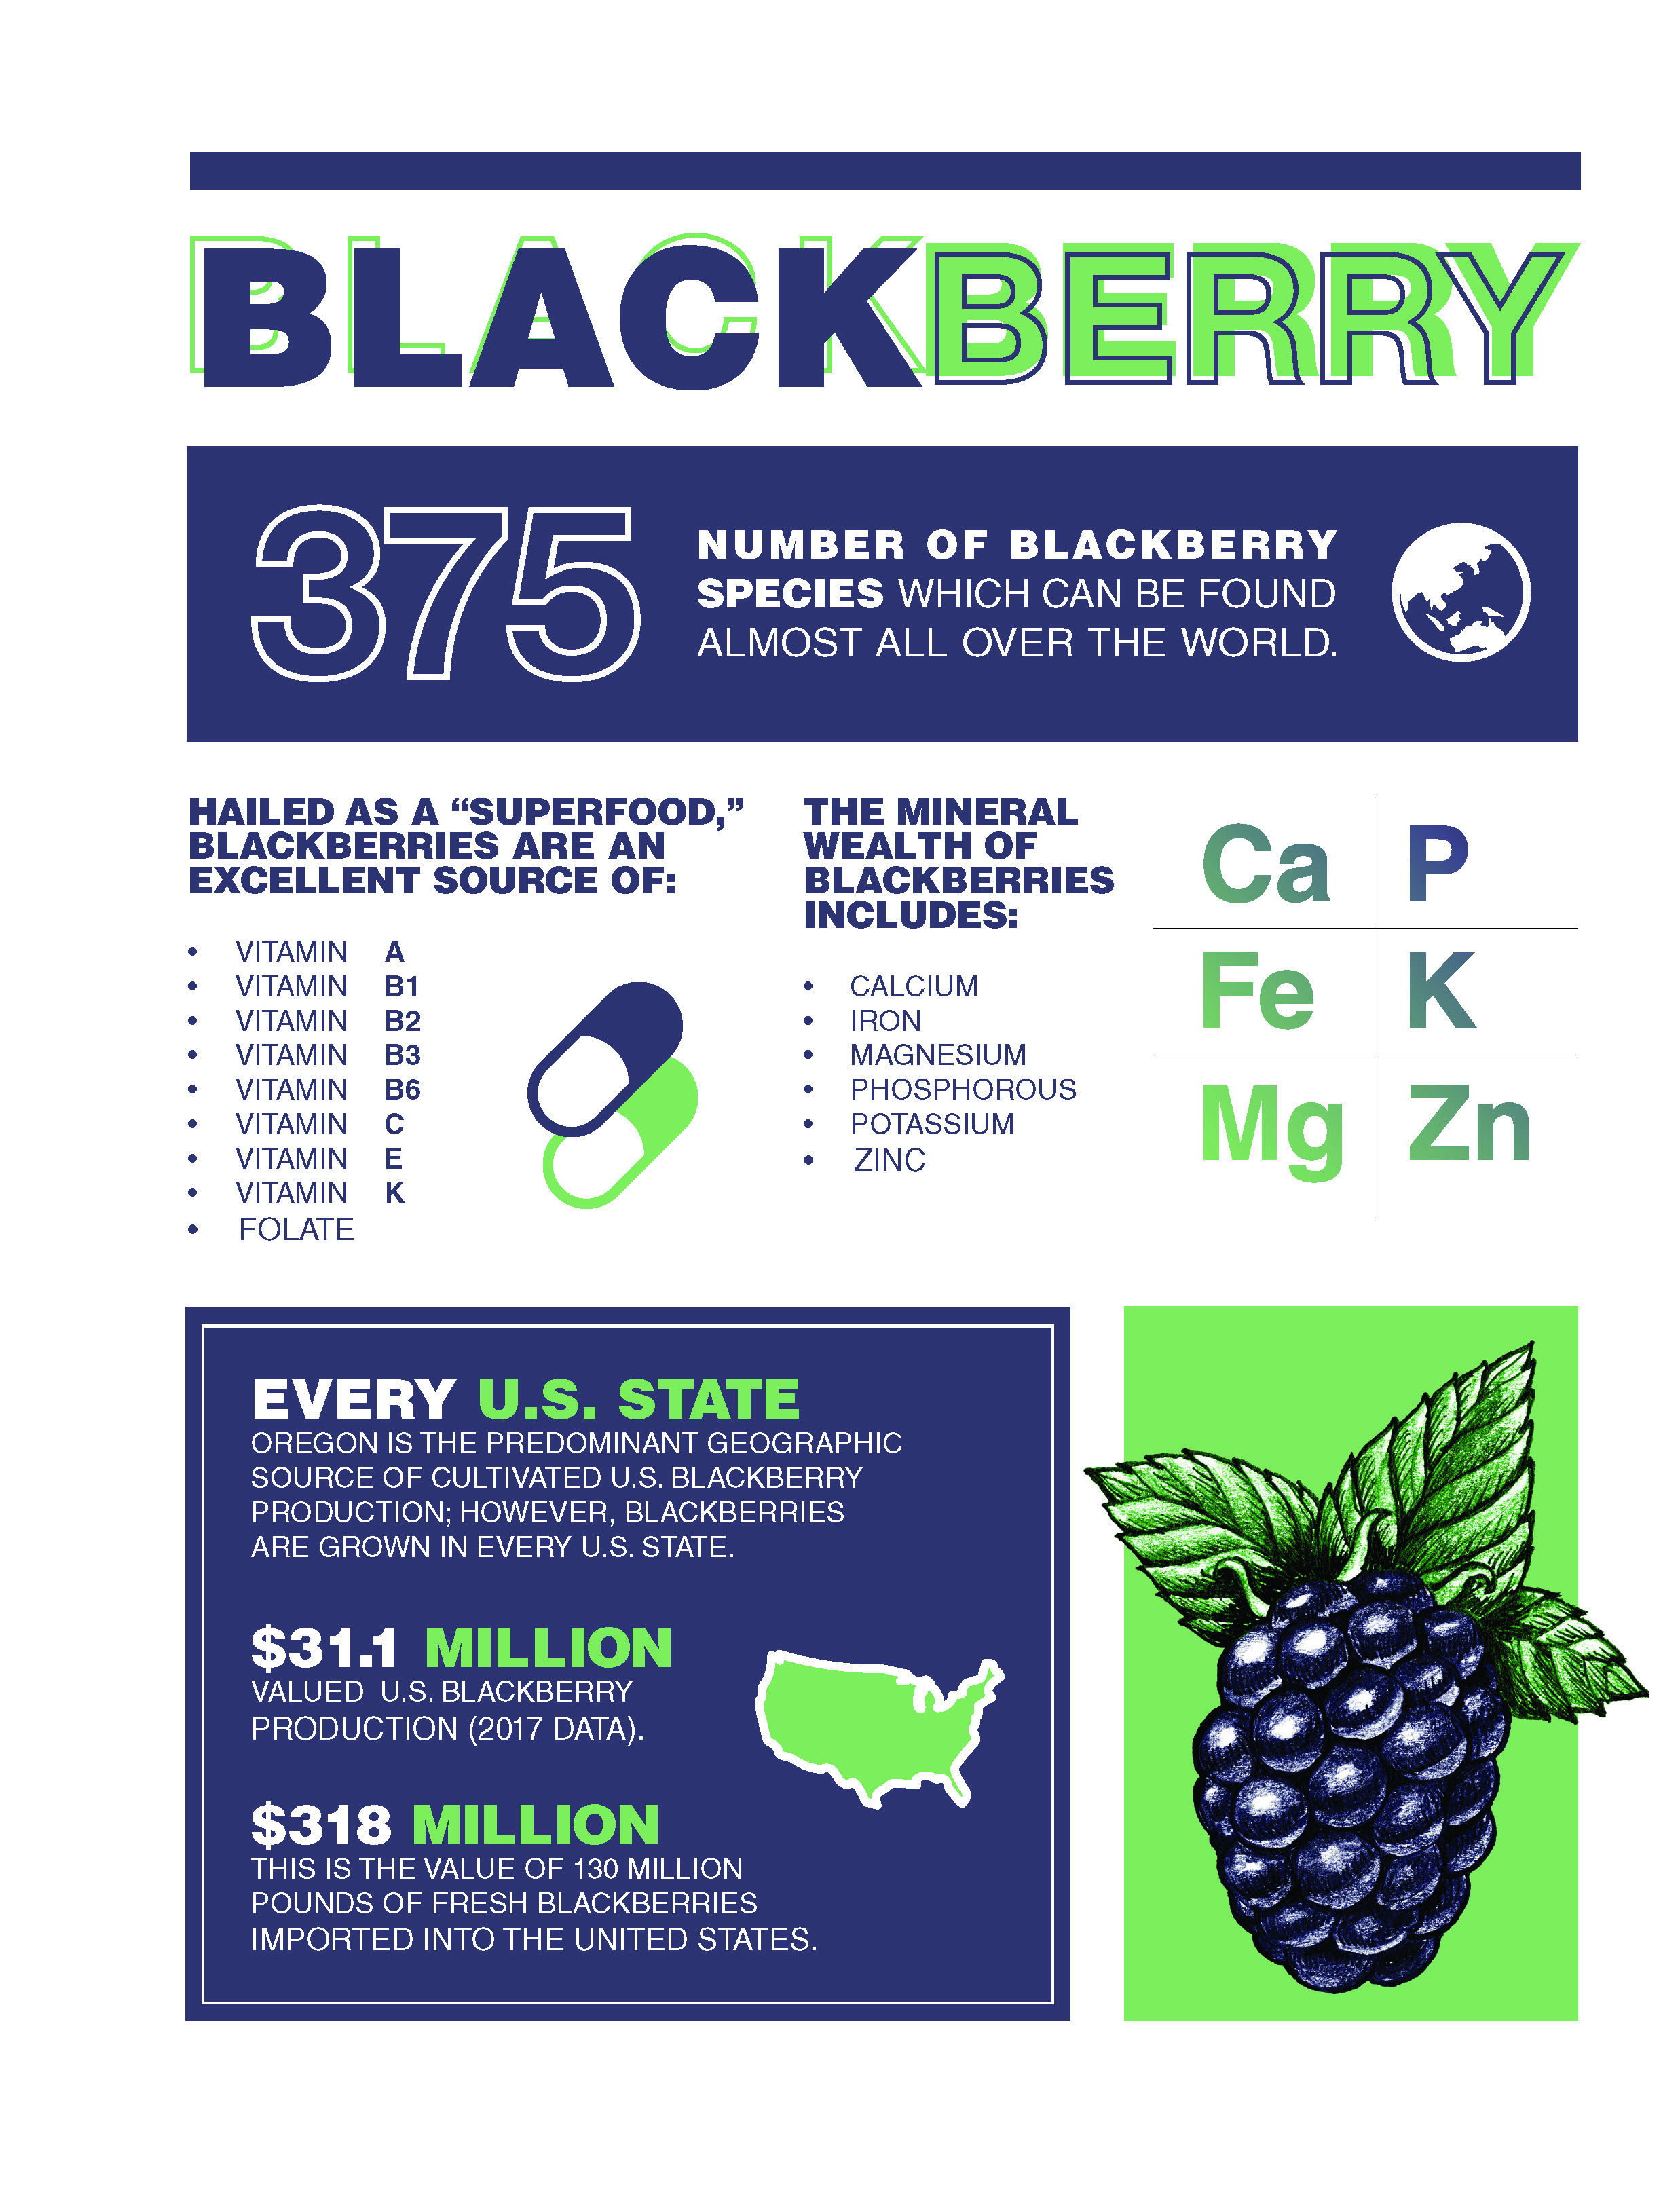 SOURCES: <a href="https://justfunfacts.com/interesting-facts-about-blackberries/" target="_blank">https://justfunfacts.com/interesting-facts-about-blackberries/</a> • <a href="https://www.agmrc.org/commodities-products/fruits/blackberries" target="_blank">https://www.agmrc.org/commodities-products/fruits/blackberries</a>